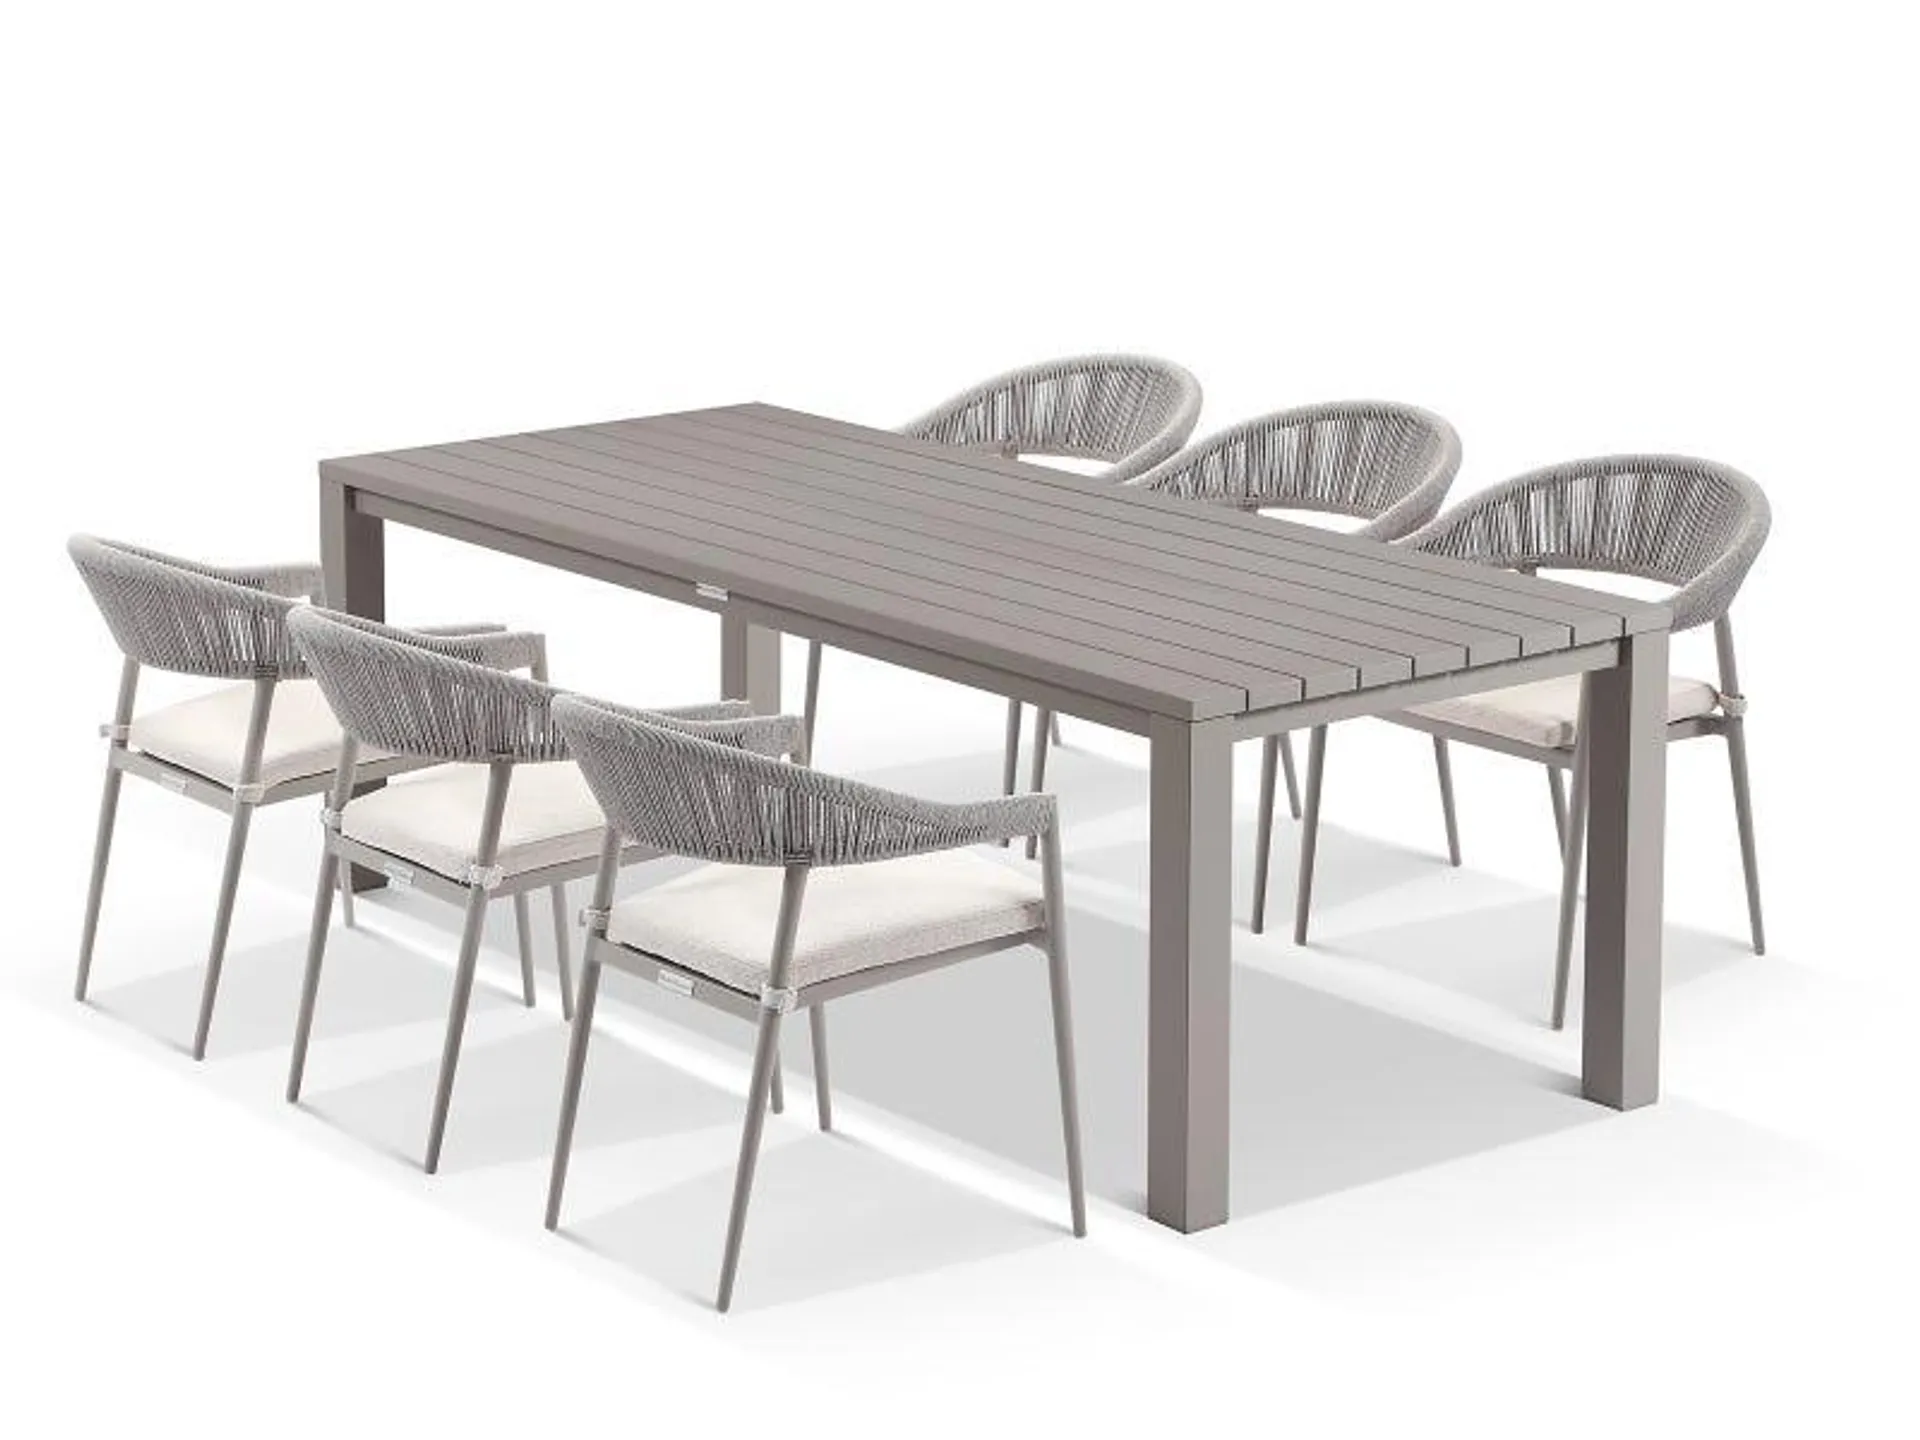 Adele Table With Nivala Chairs 7pc Outdoor Dining Setting